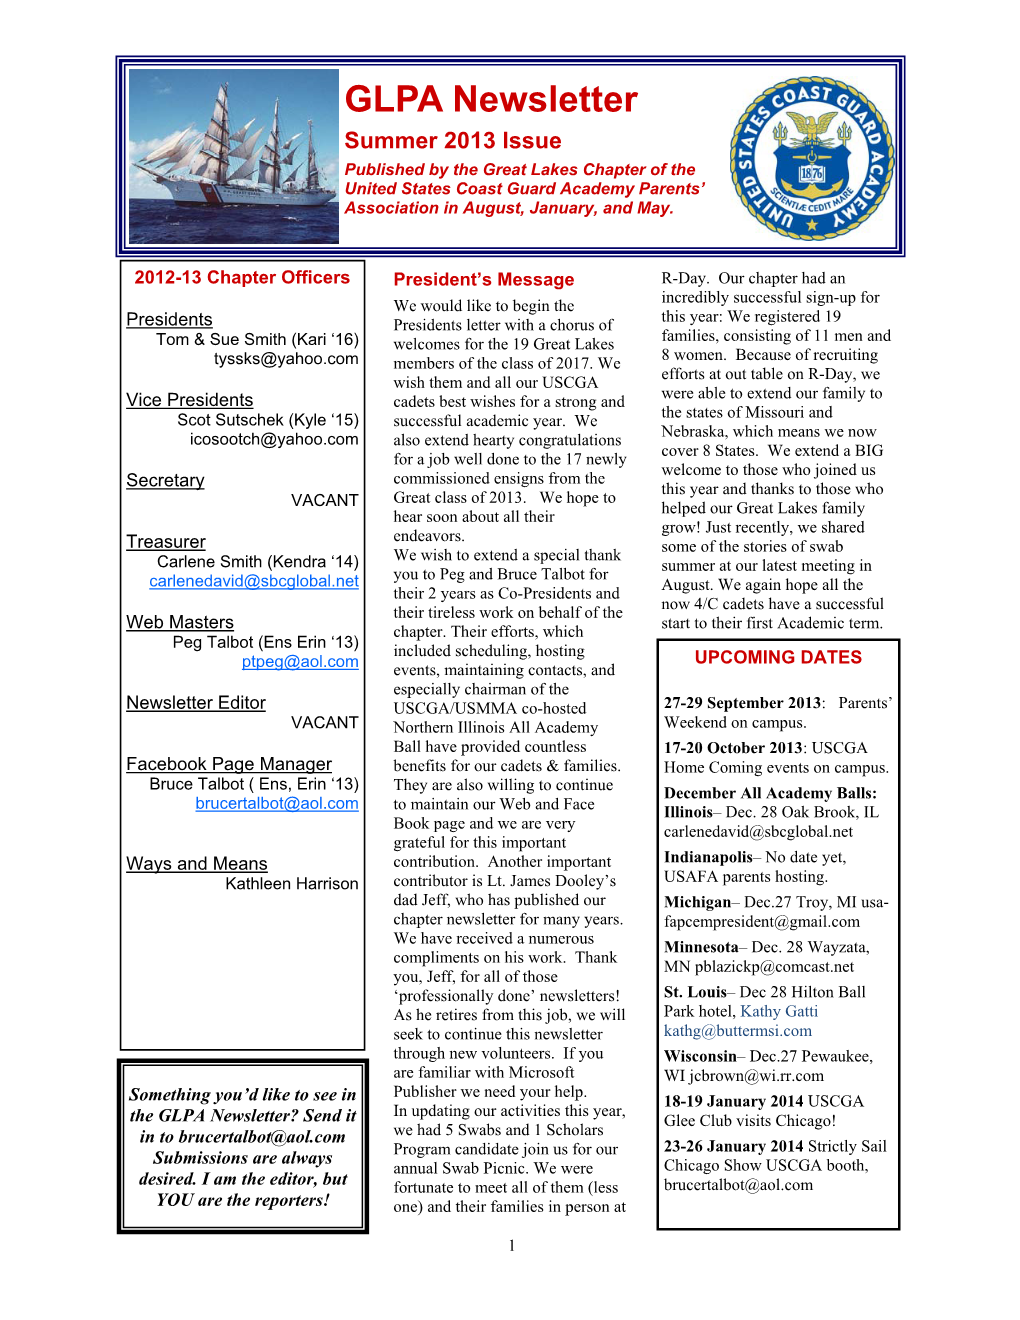 GLPA Newsletter Summer 2013 Issue Published by the Great Lakes Chapter of the United States Coast Guard Academy Parents’ Association in August, January, and May